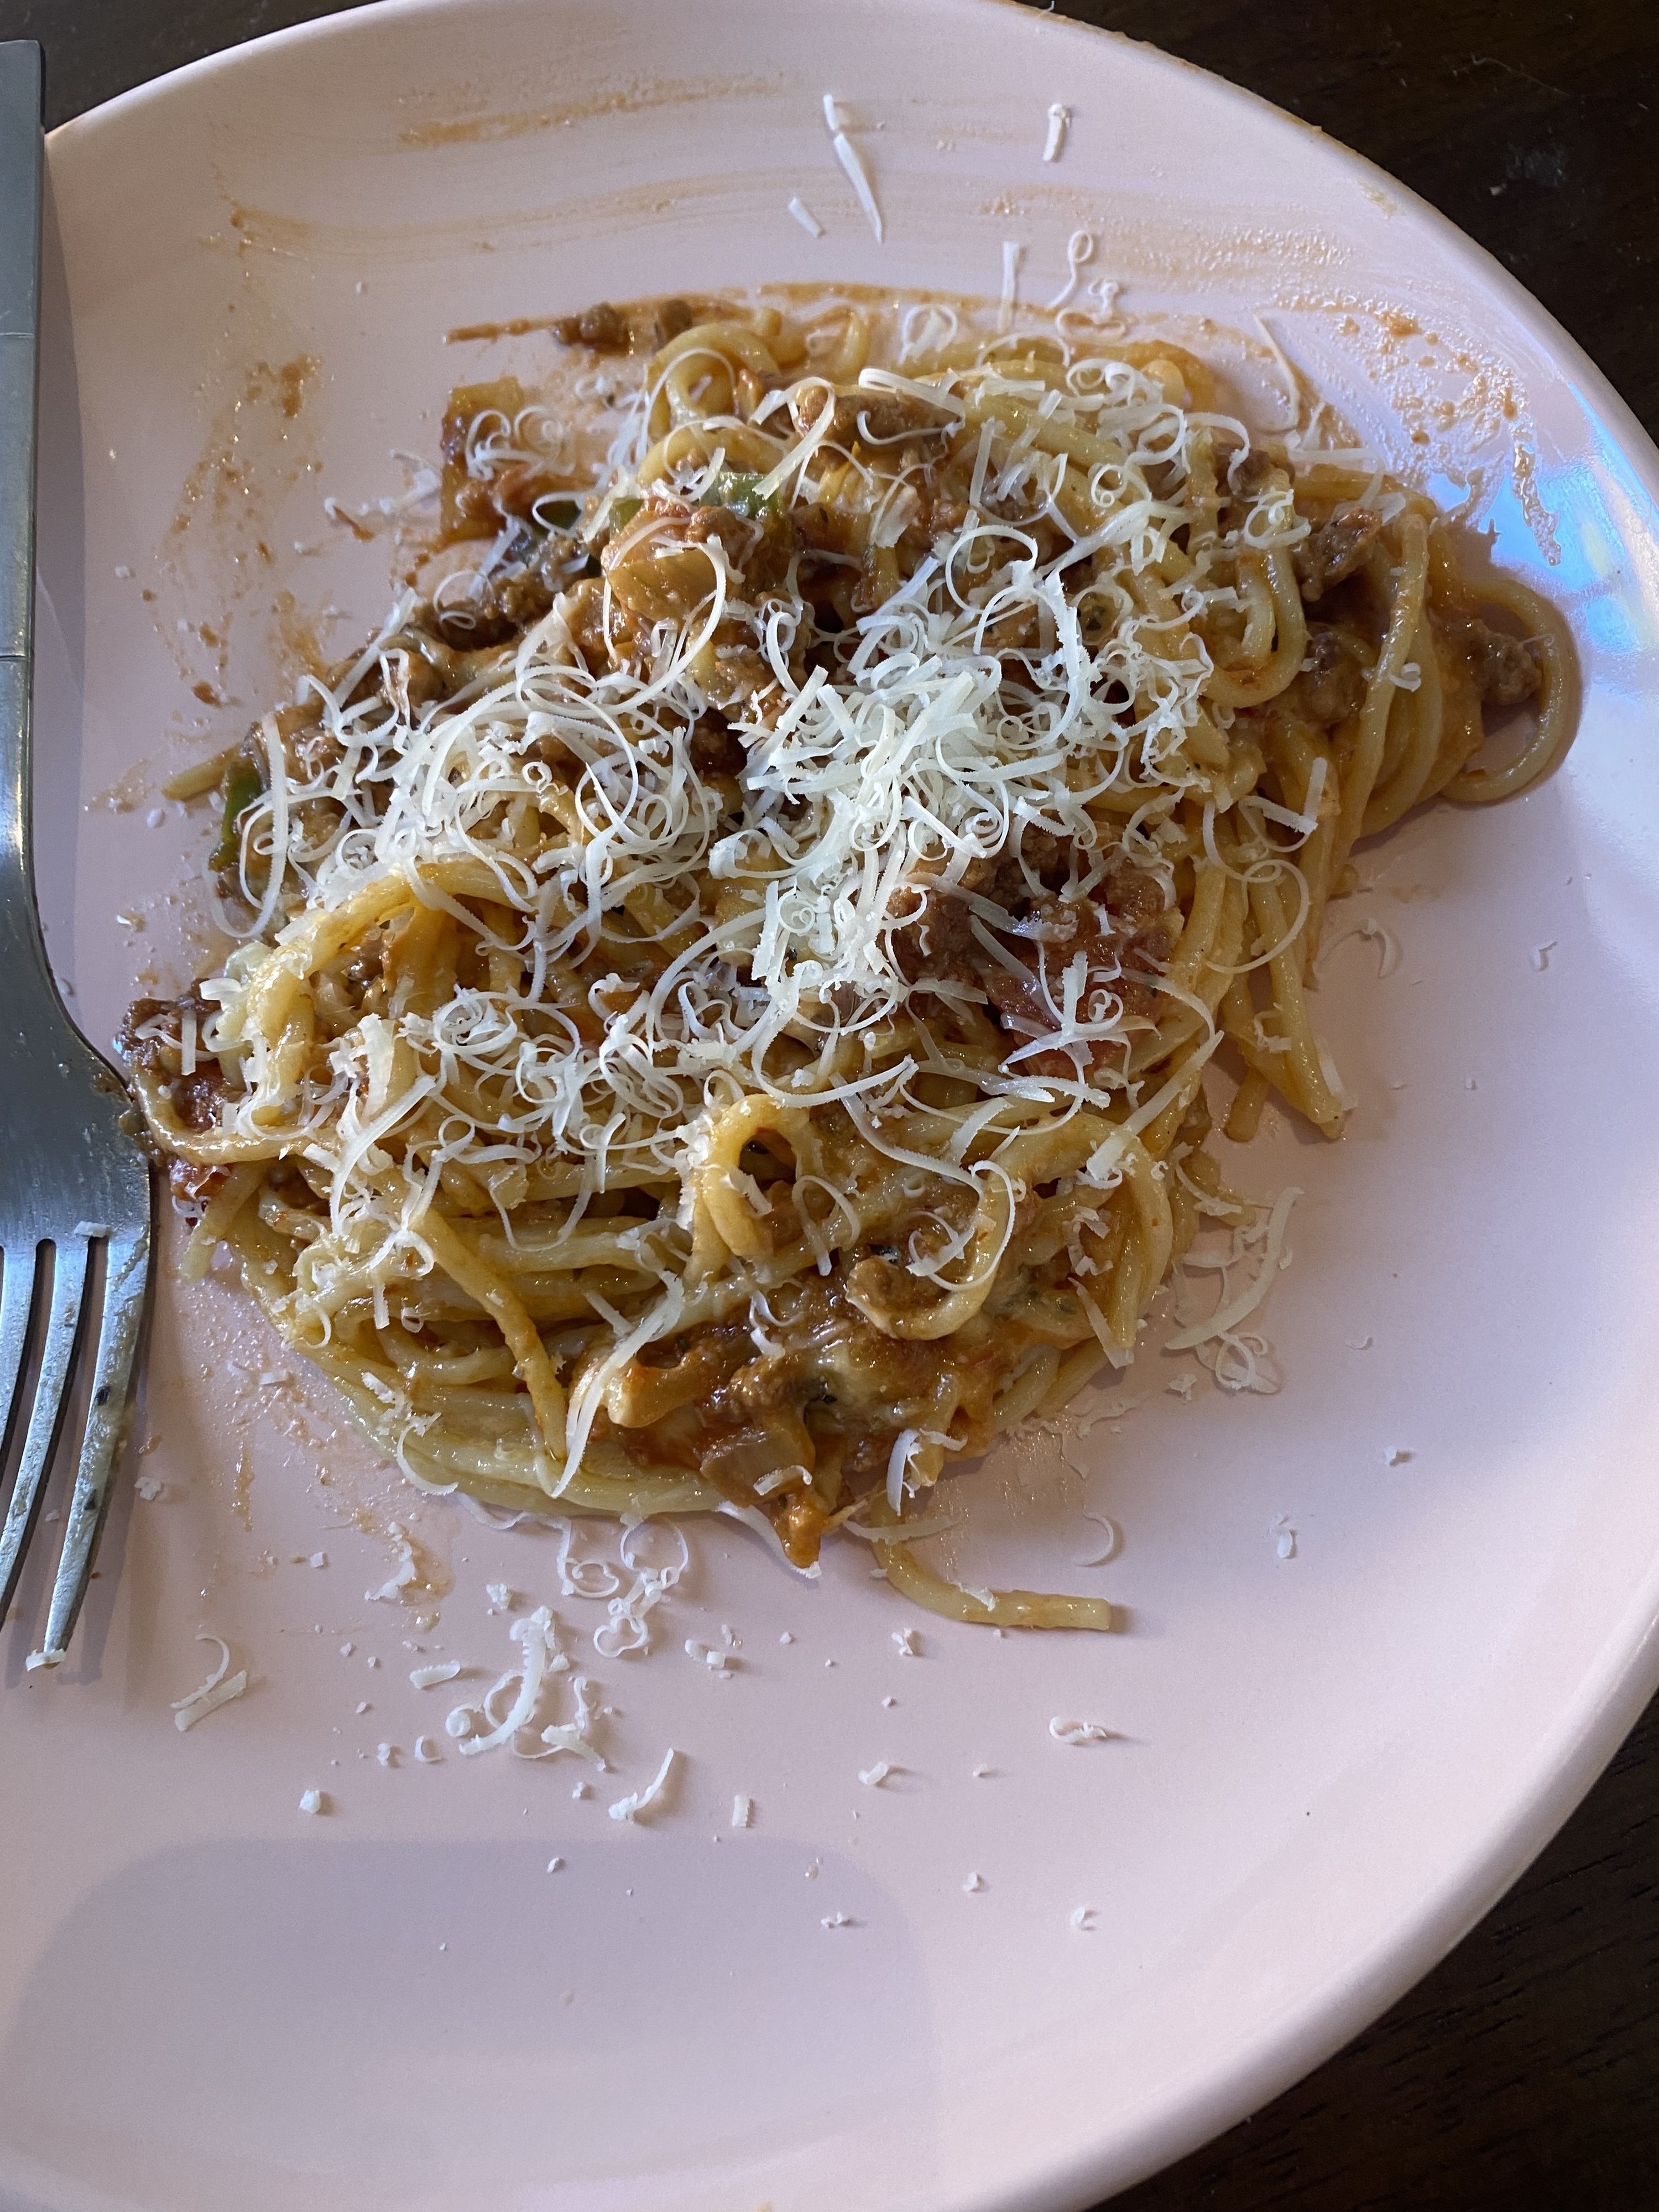 plate of the pasta with shredded cheese added